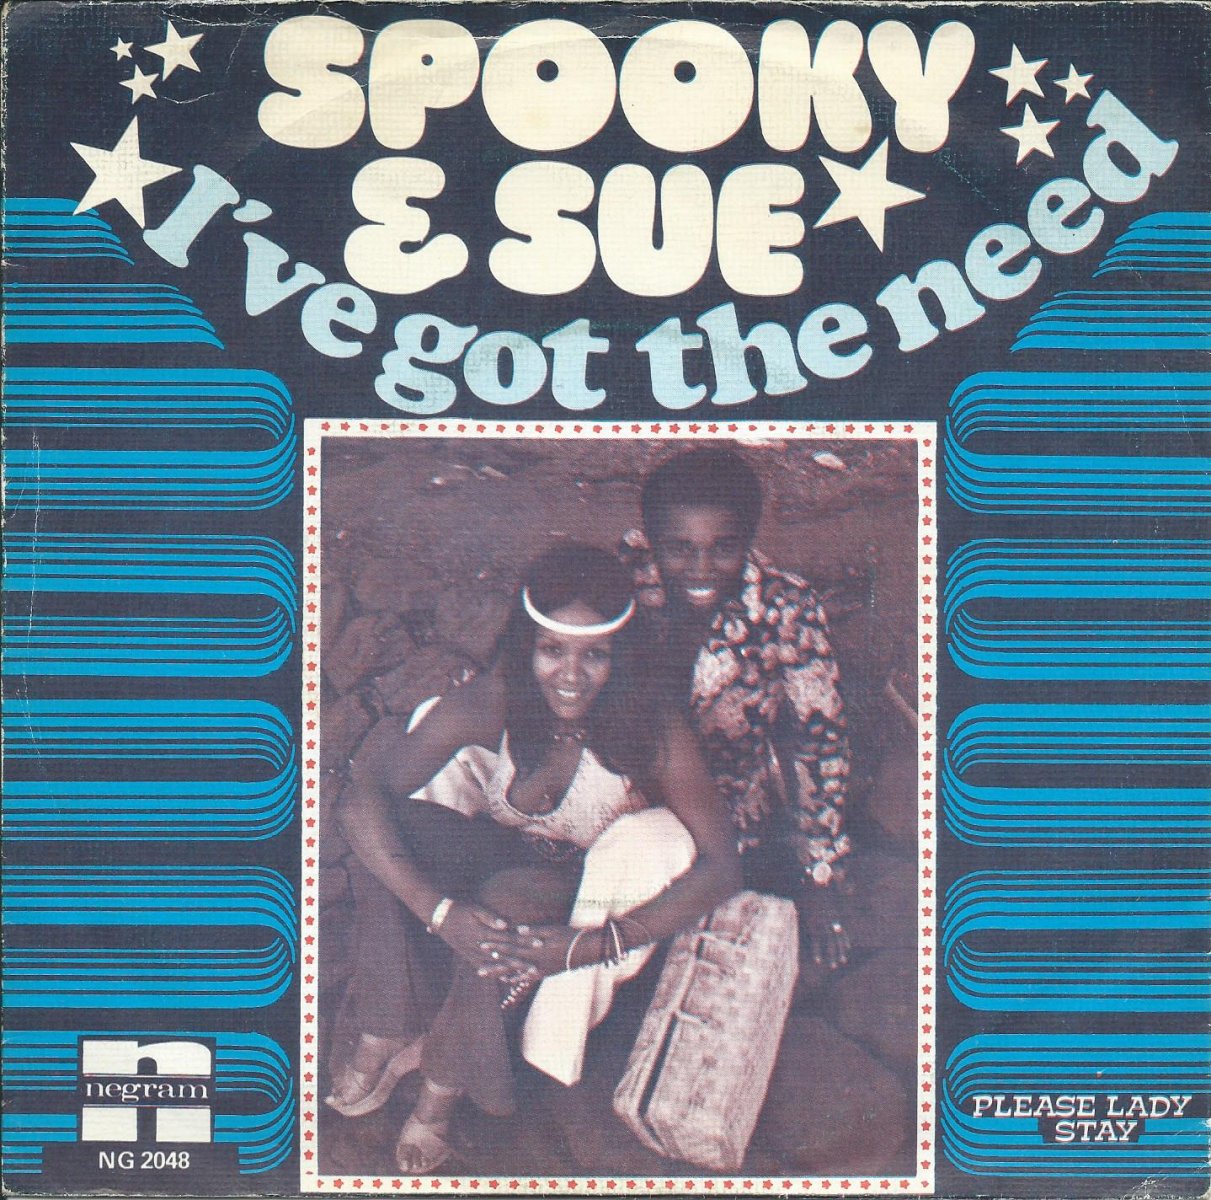 SPOOKY & SUE / I'VE GOT THE NEED / PLEASE LADY STAY (7